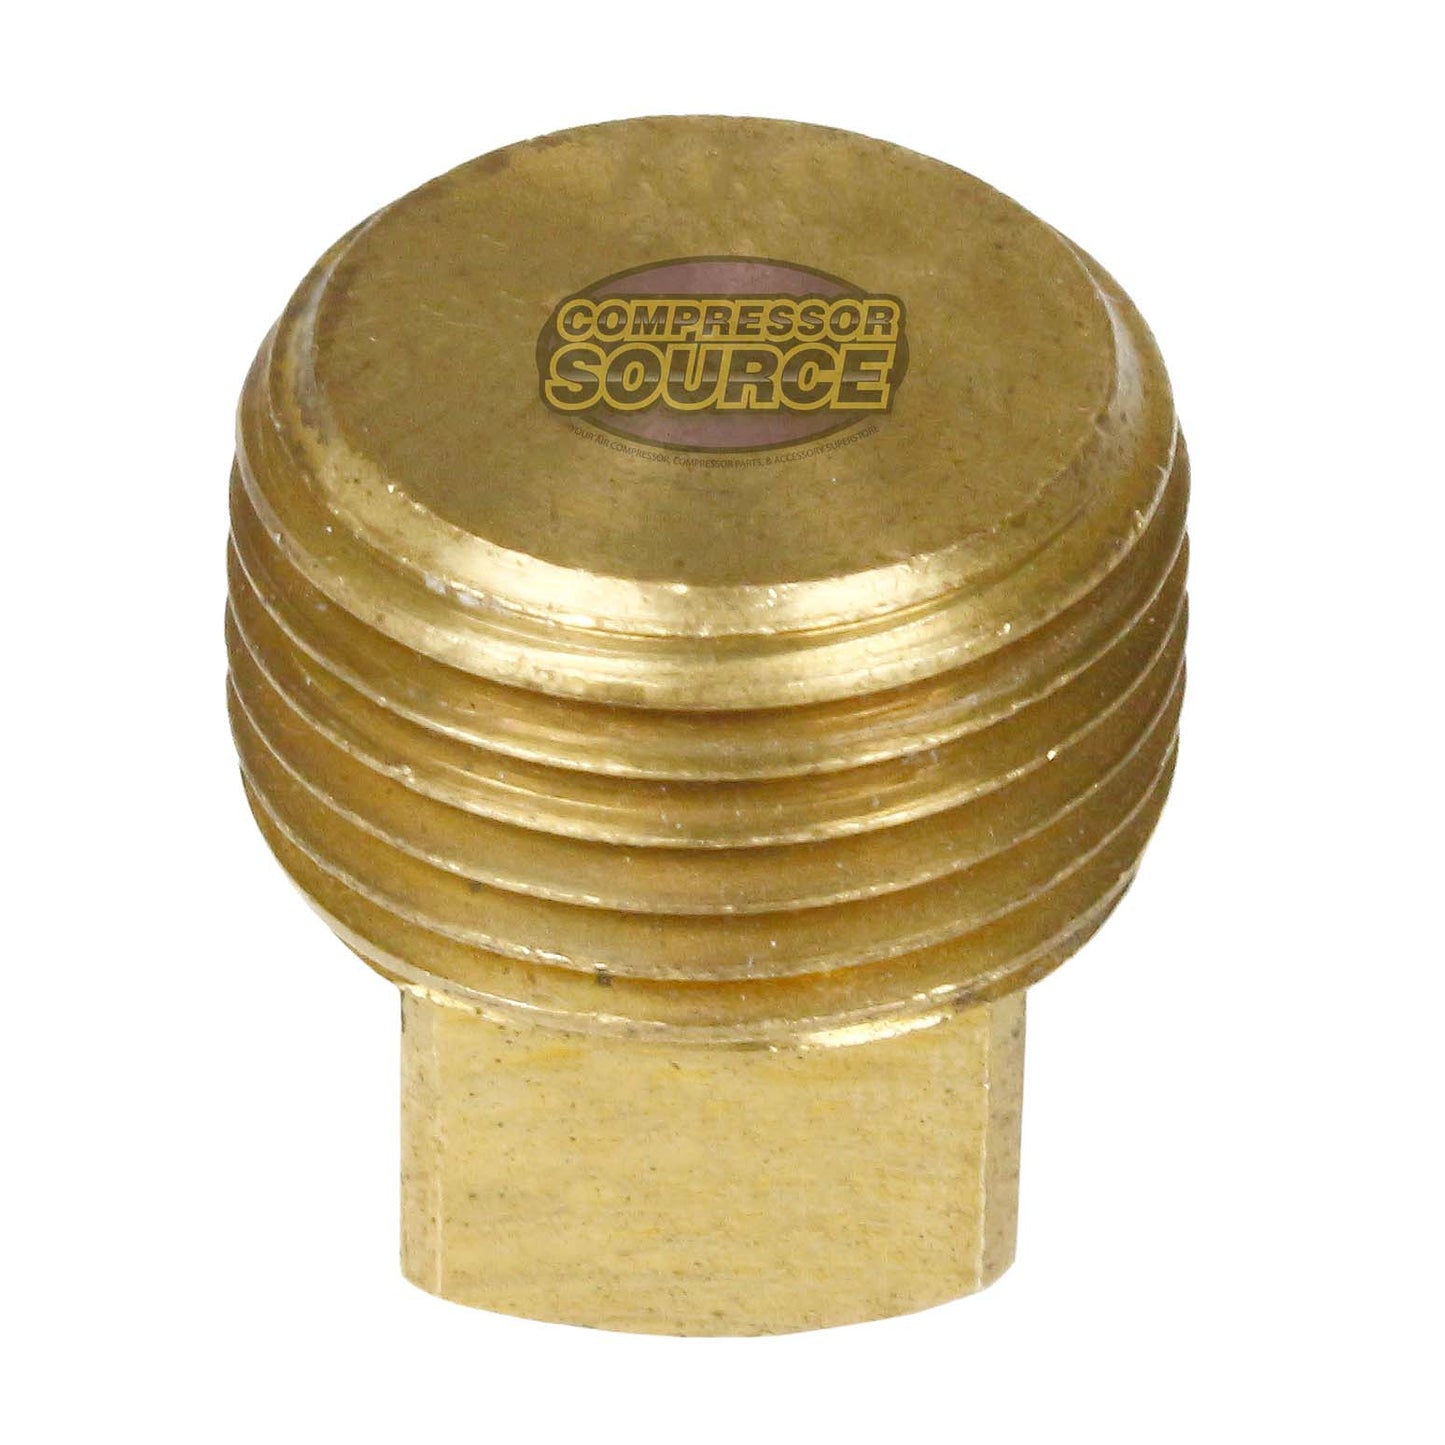 3/8" NPTF Barstock Square Head Plug Solid Brass Pipe Fitting End Cap Brand New